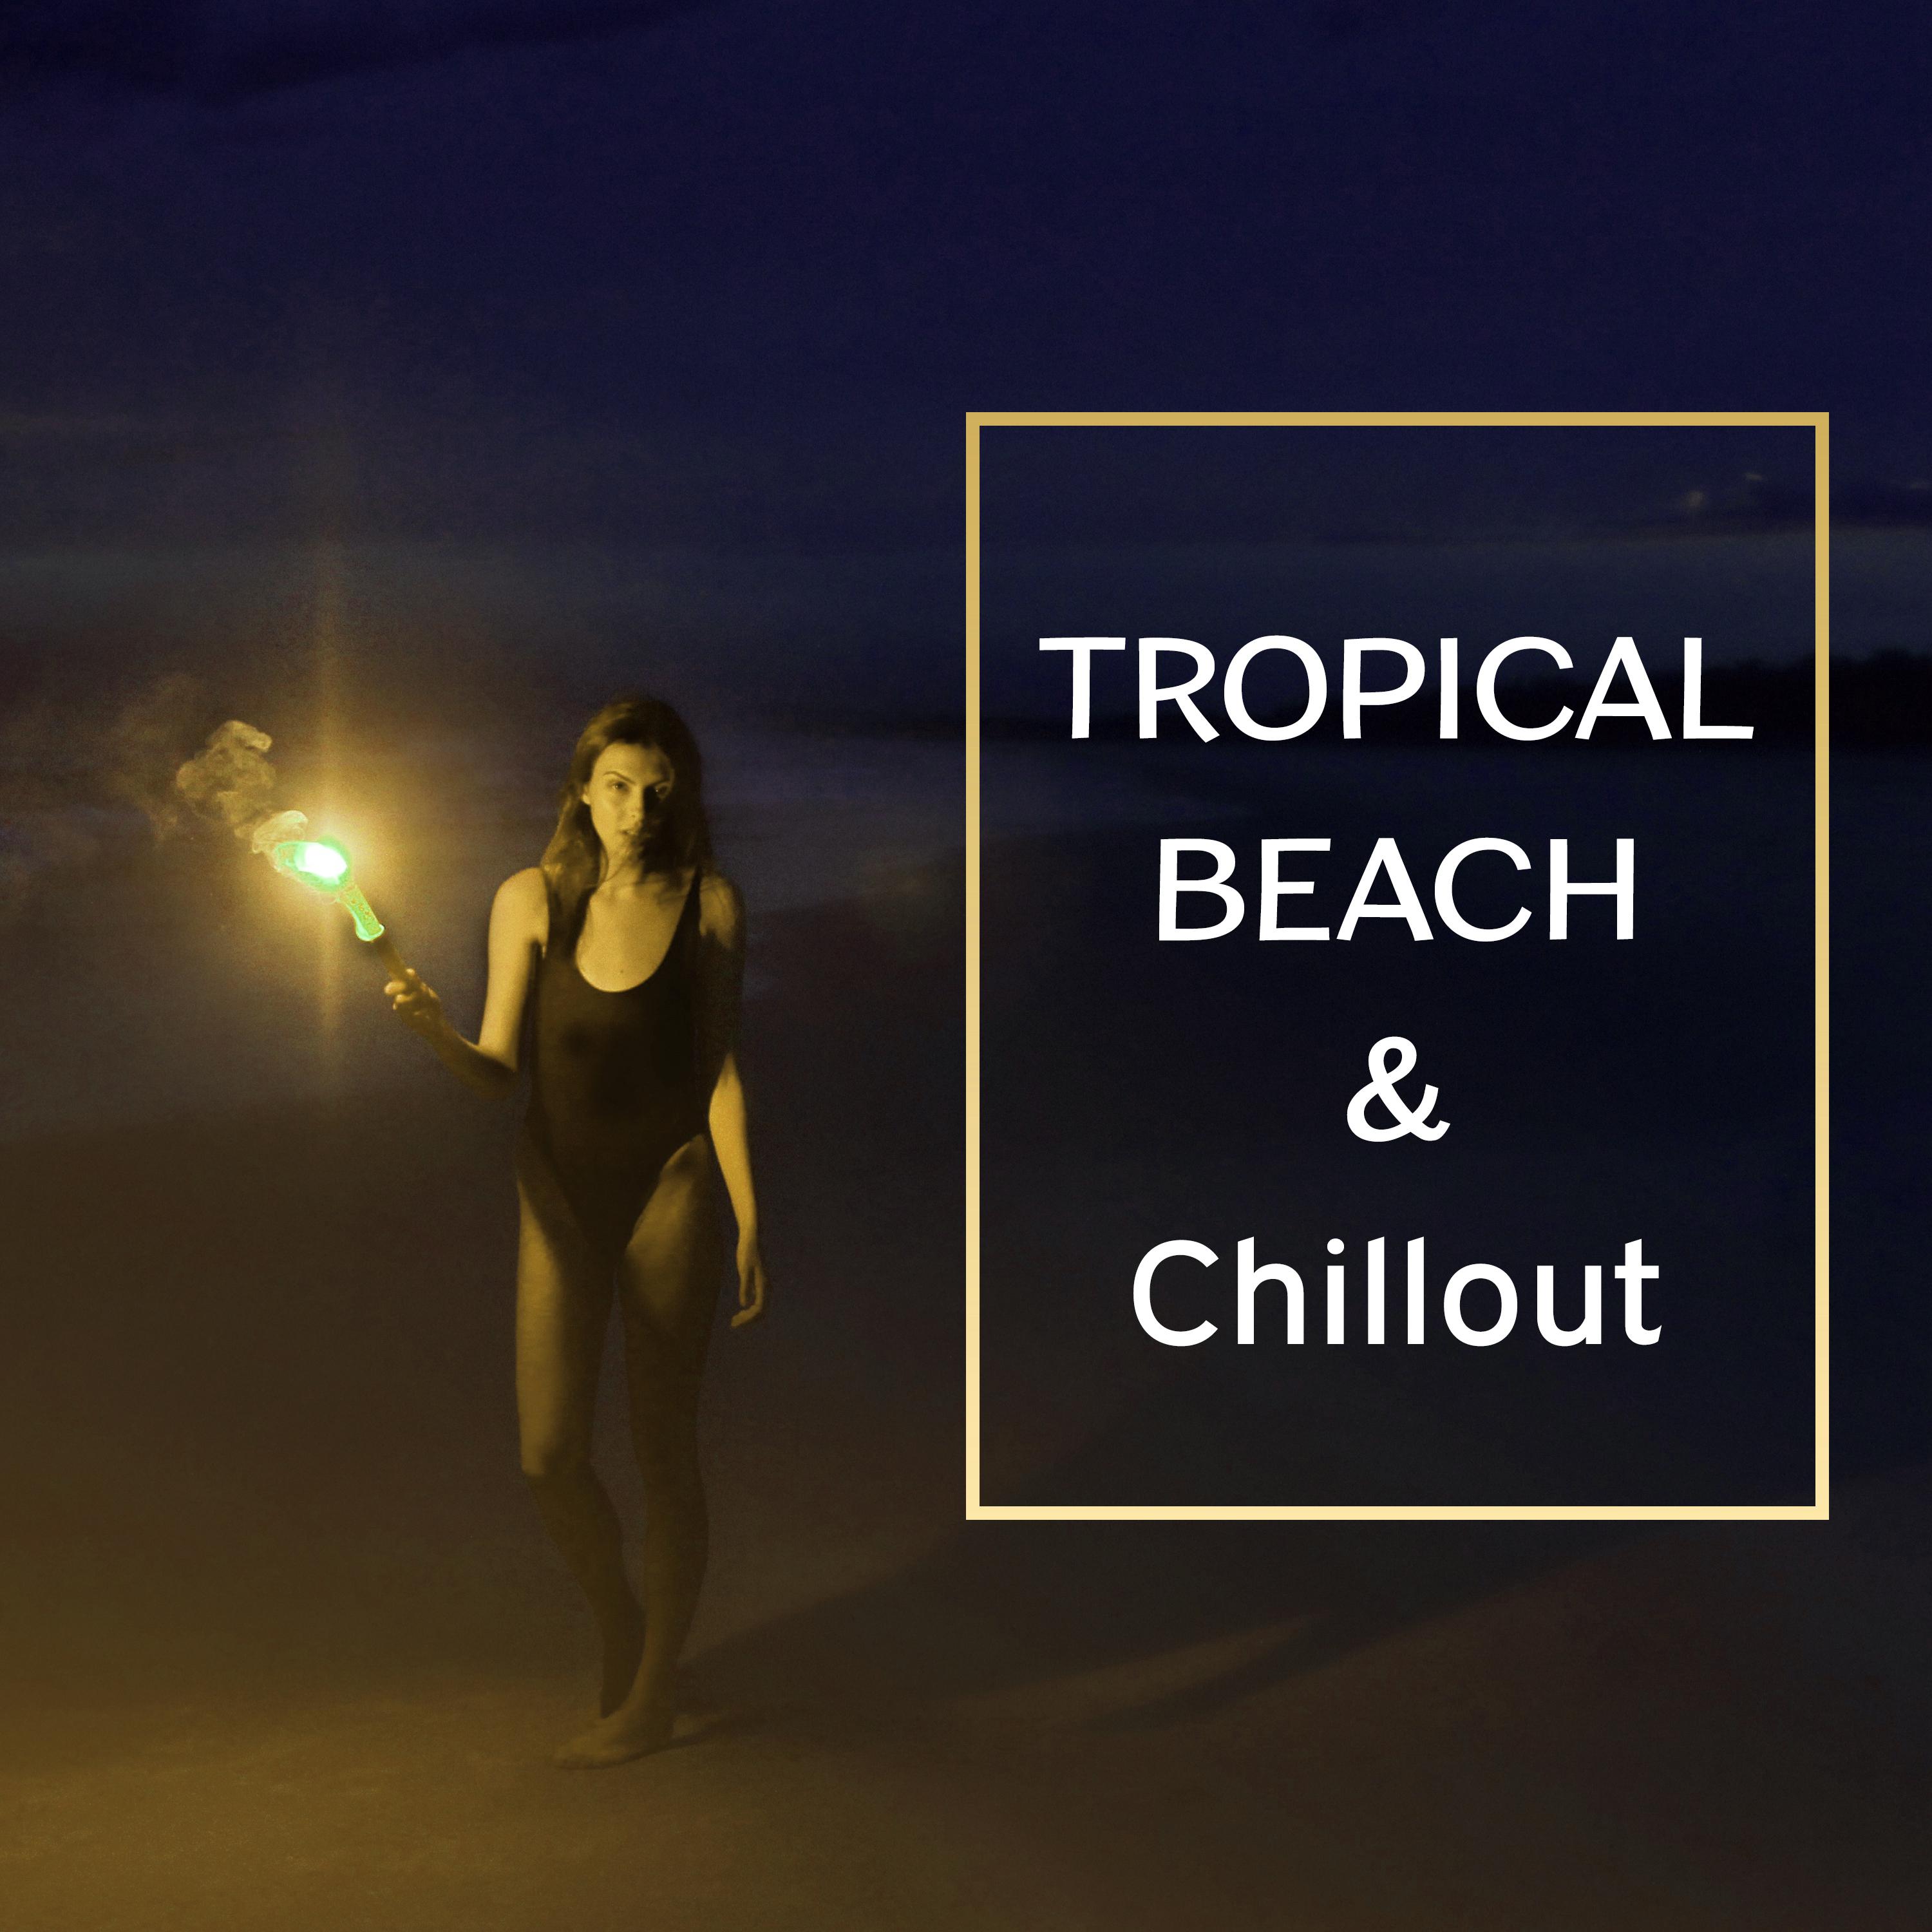 Tropical Beach  Chillout  Holiday Music, Chill Out 2017, Summer, Relaxation, Lounge, Electro Chillout